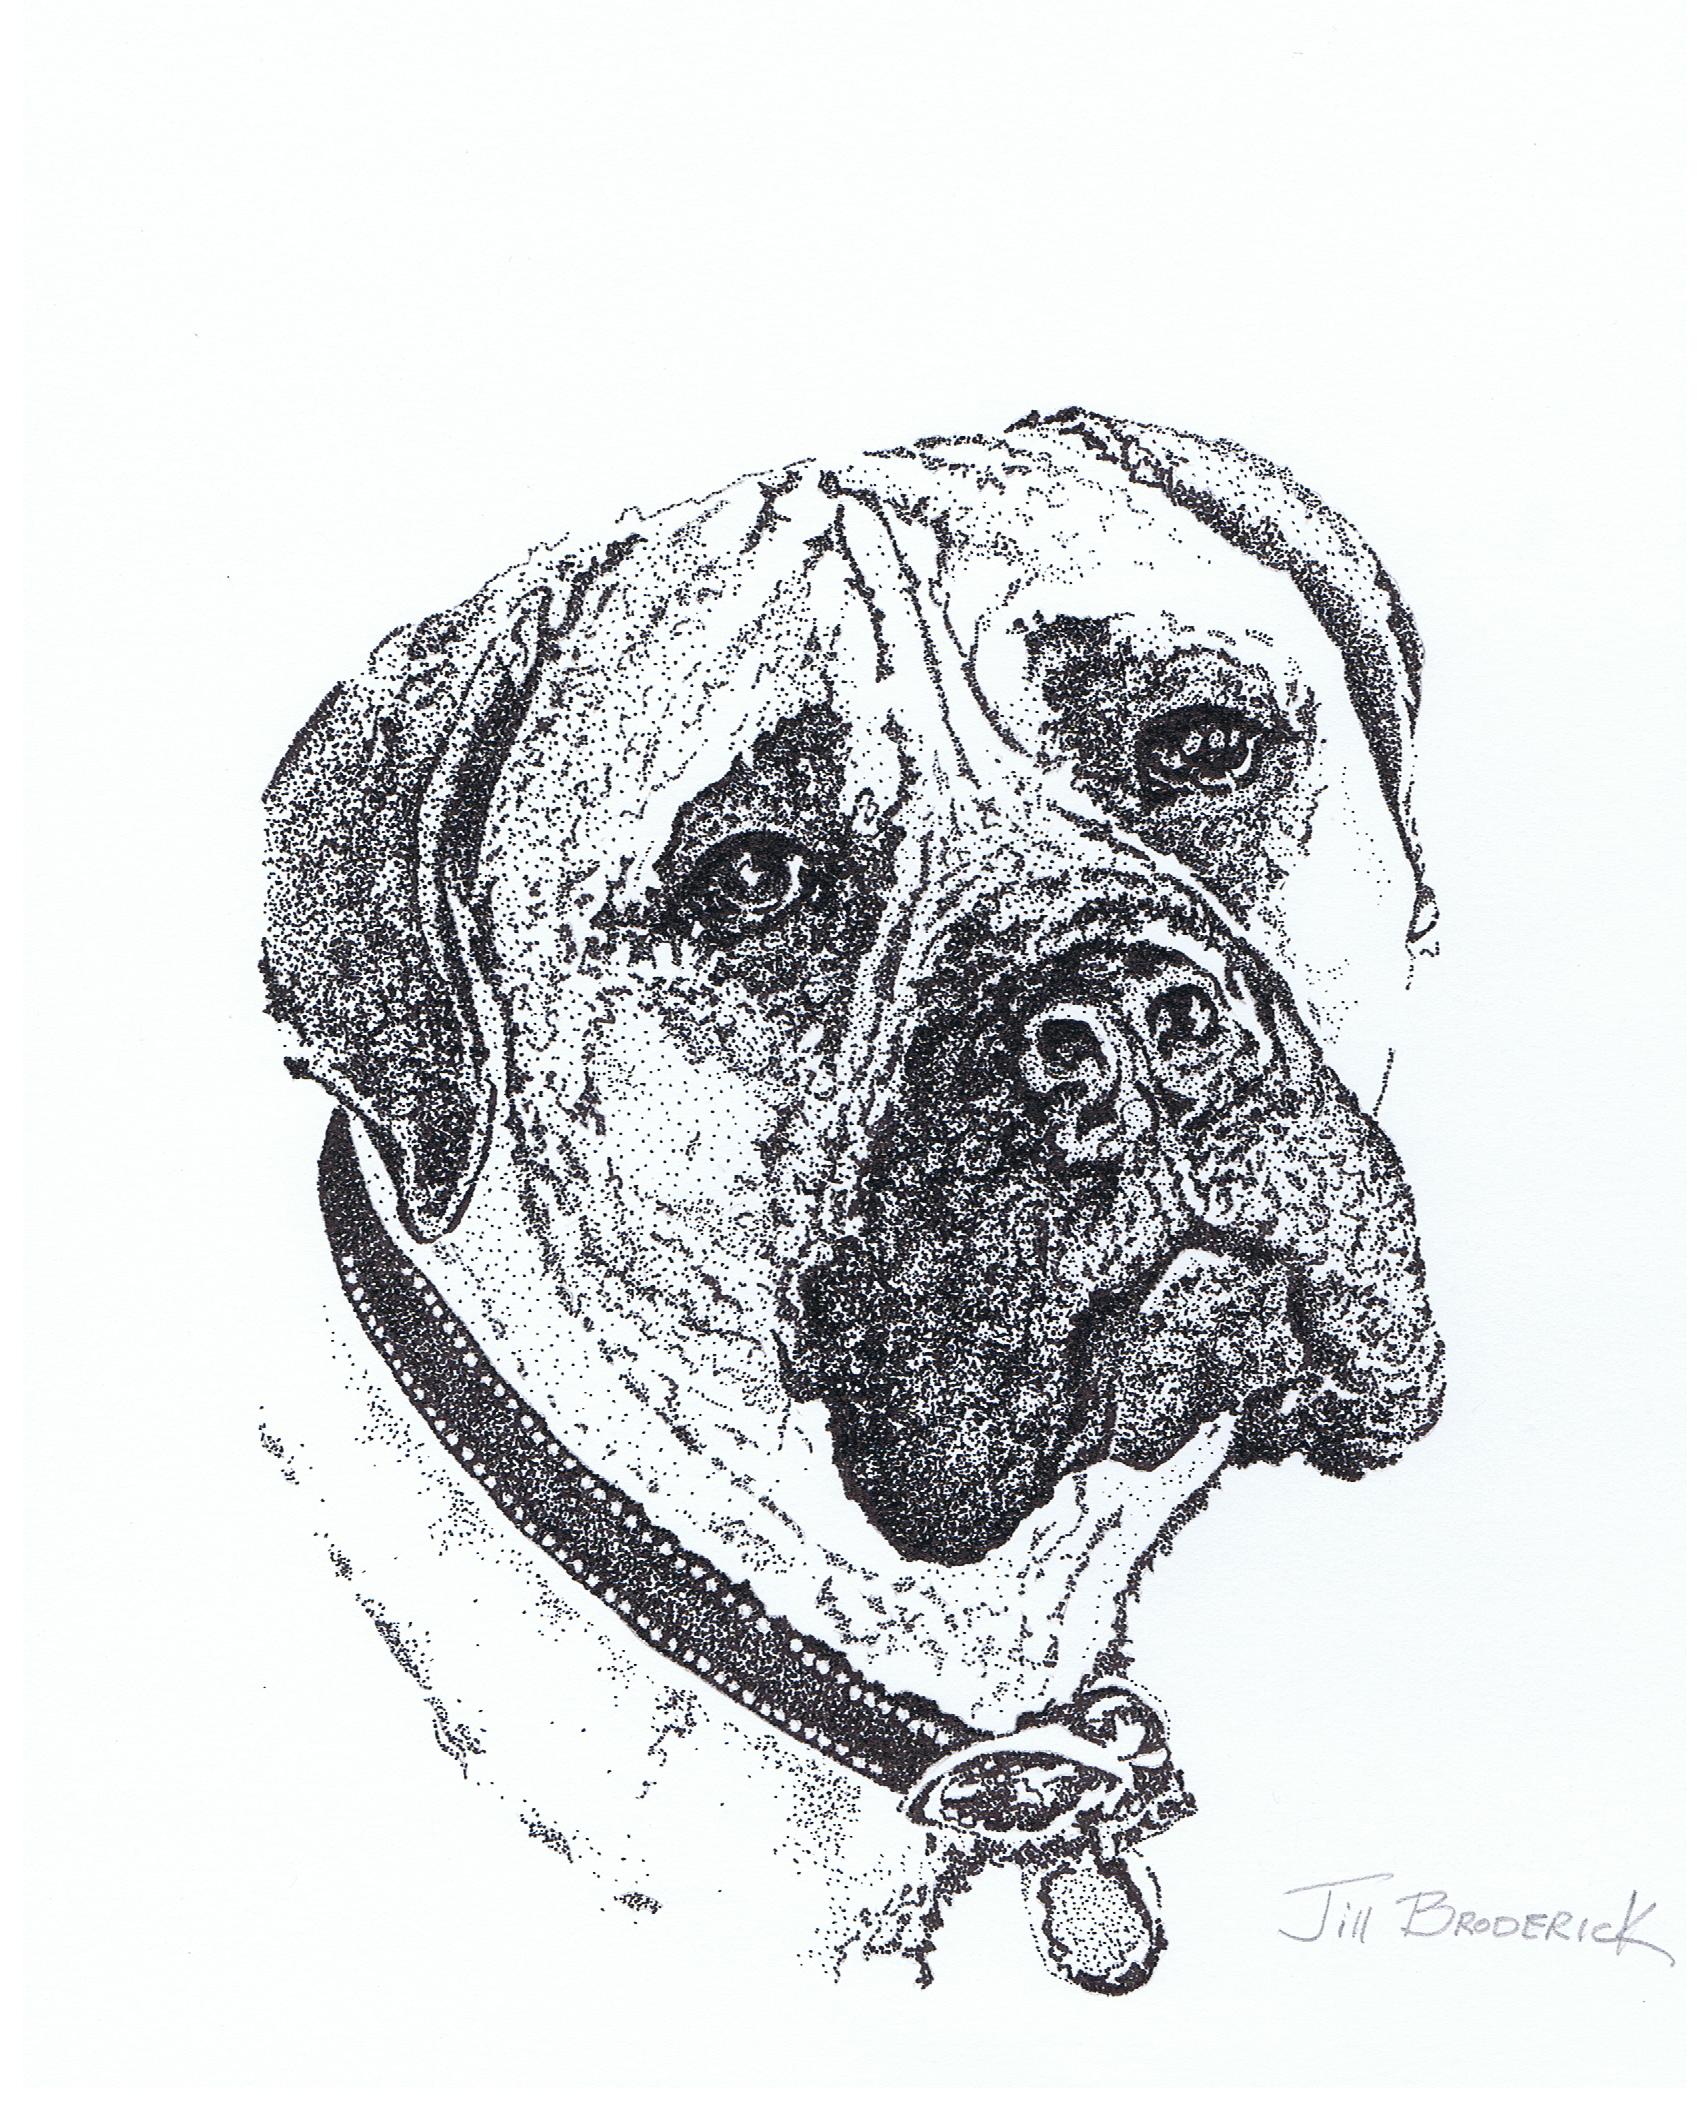 PUP 2 - PEN AND INK - 11 X 14 IN - PRIVATE COLLECTION